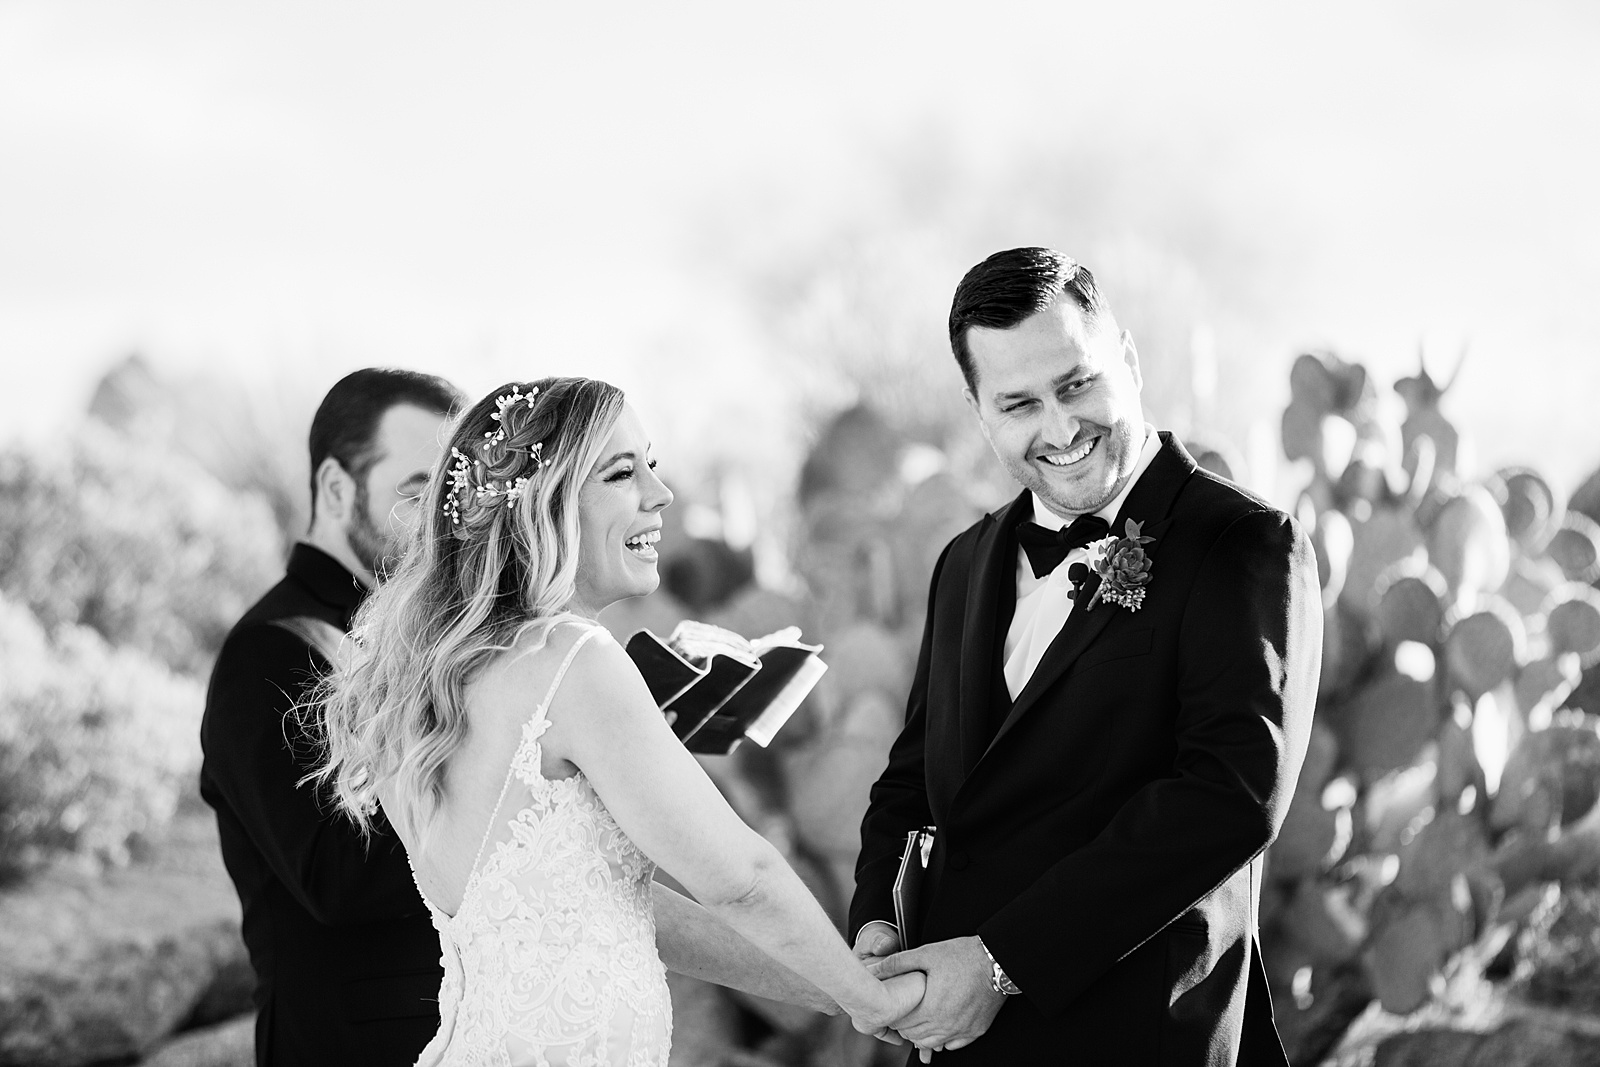 Bride and groom laughing together during Troon North wedding ceremony by Scottsdale wedding photographer PMA Photography.